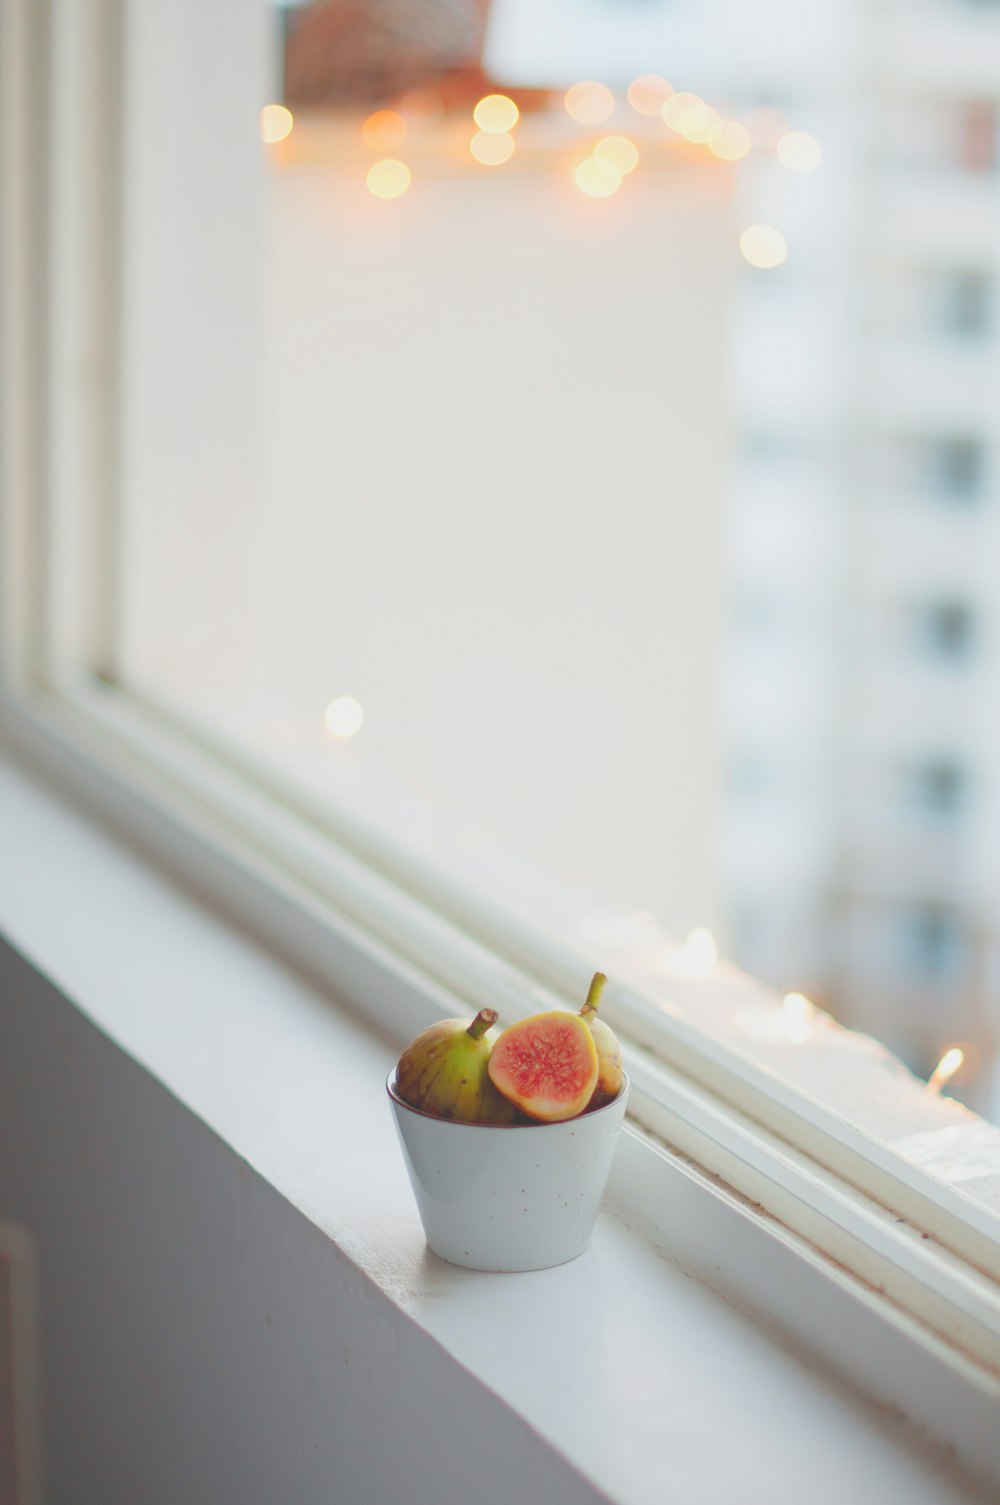 bowl of fruits on window sill